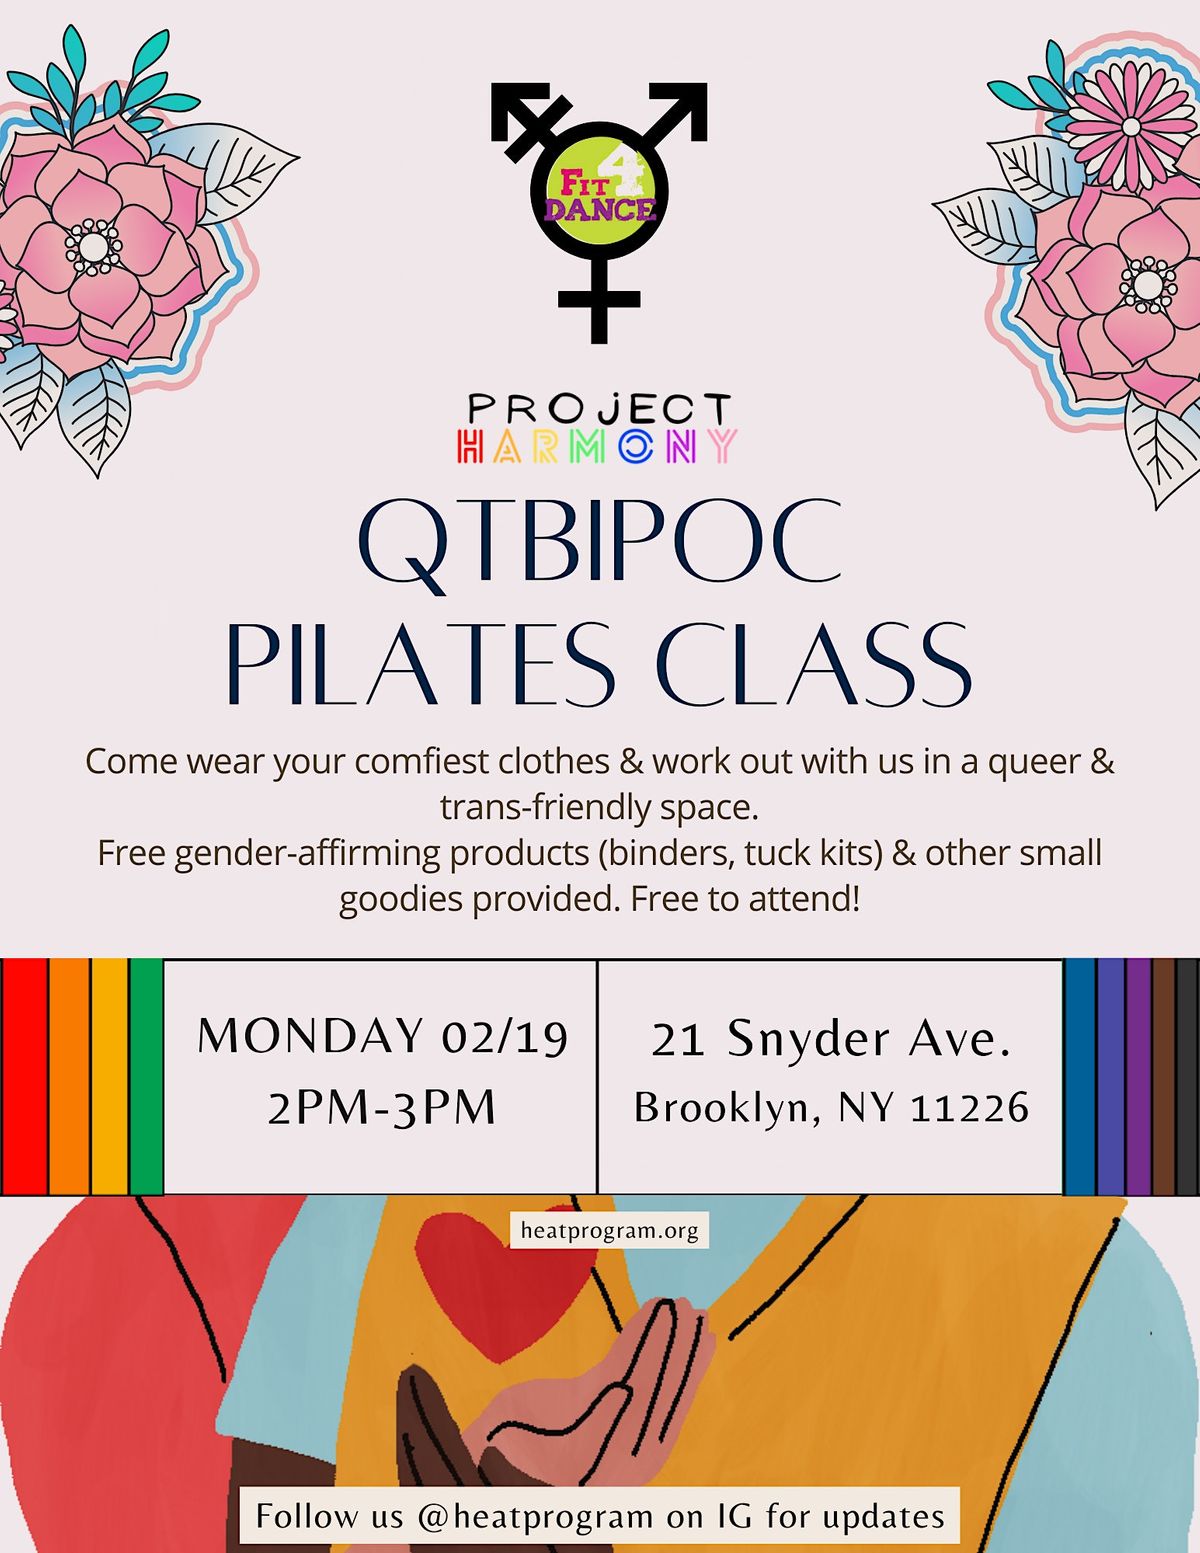 Project Harmony and Fit4Dance QTBIPOC Pilates Class